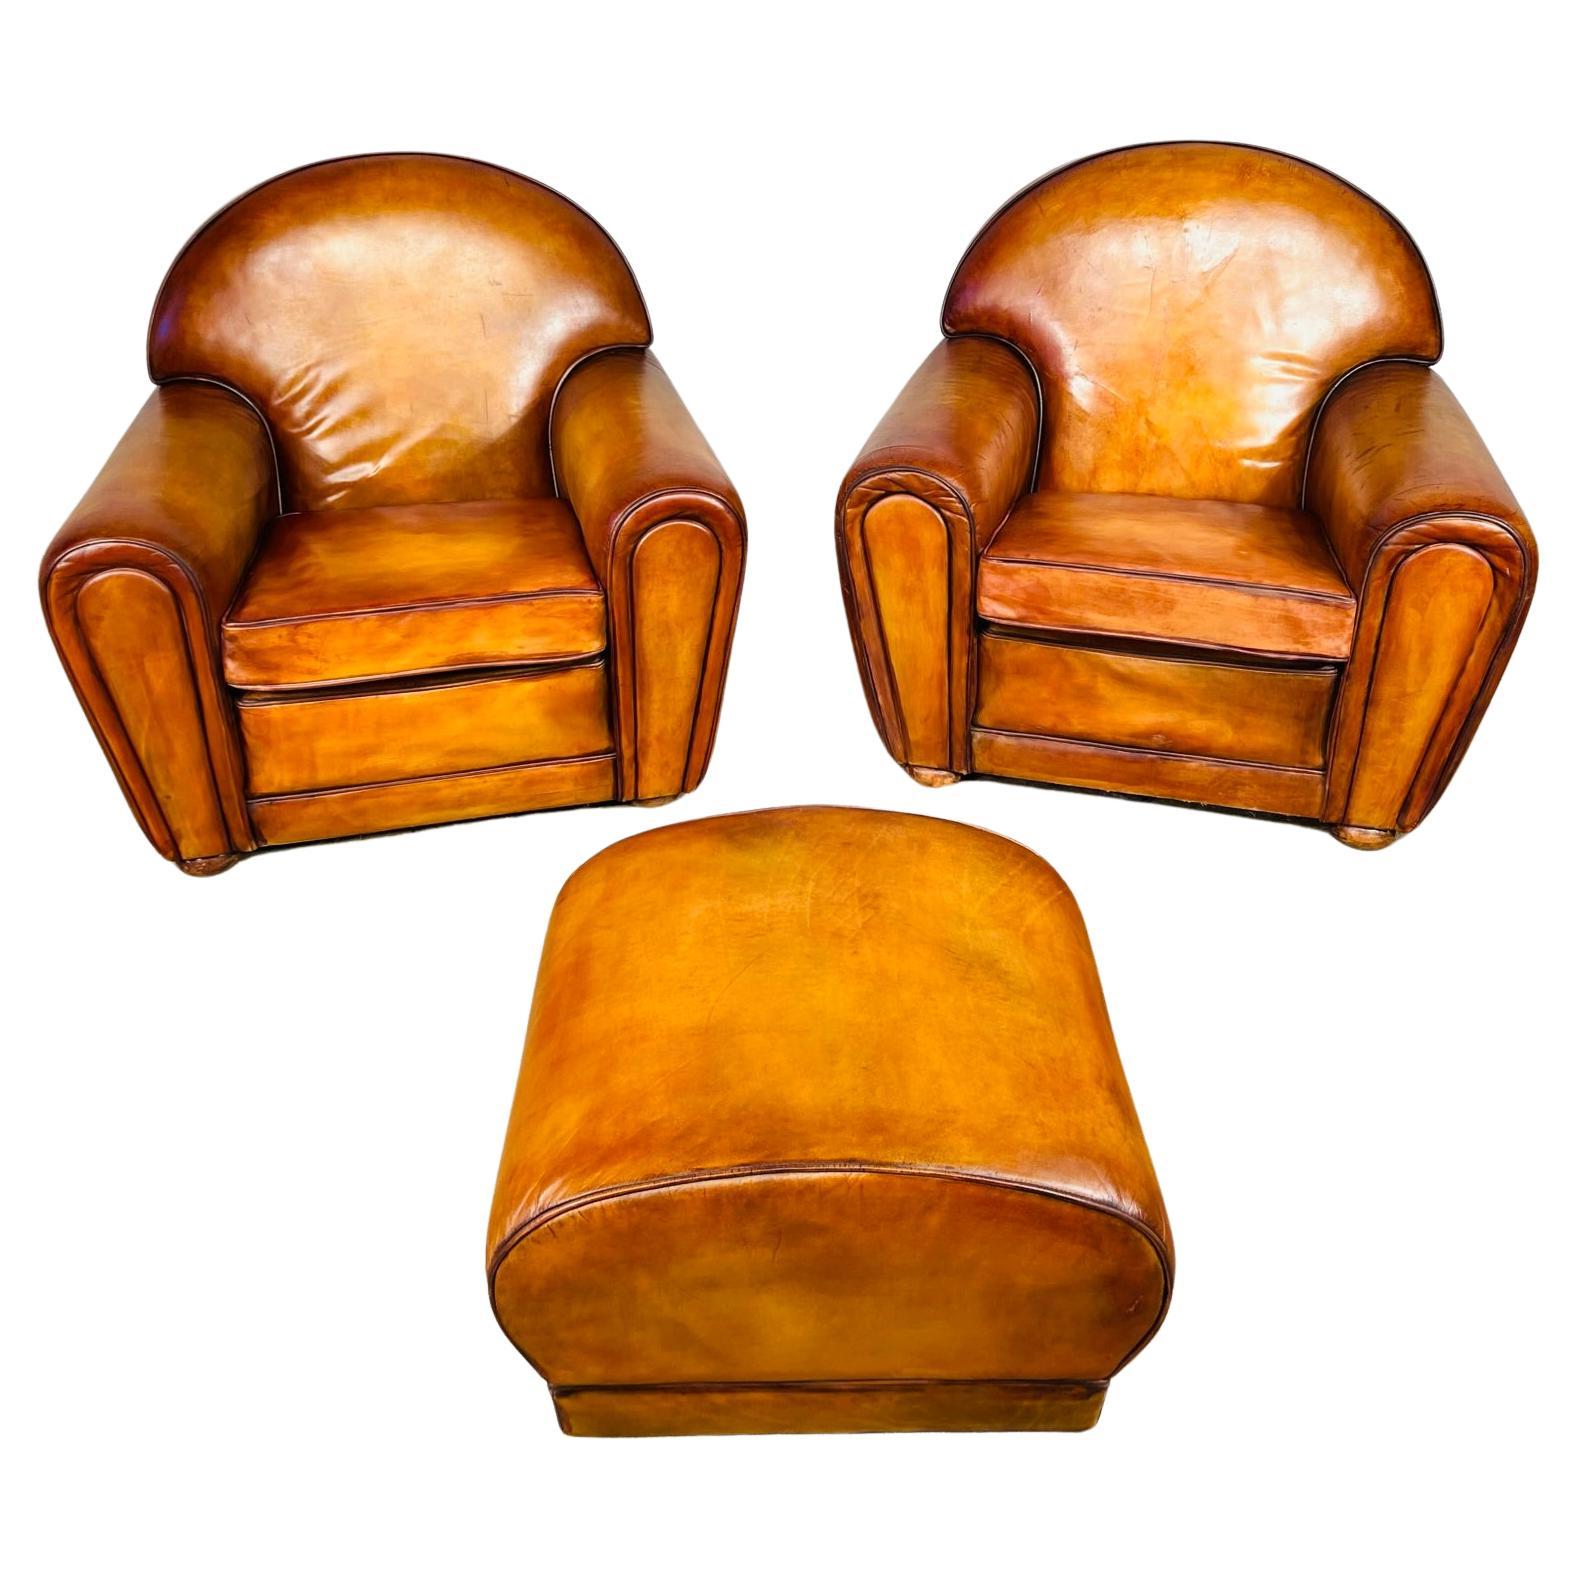 Huge Pair of Art Deco Leather Club Chairs Armchairs and Foot Stool 1940s #668